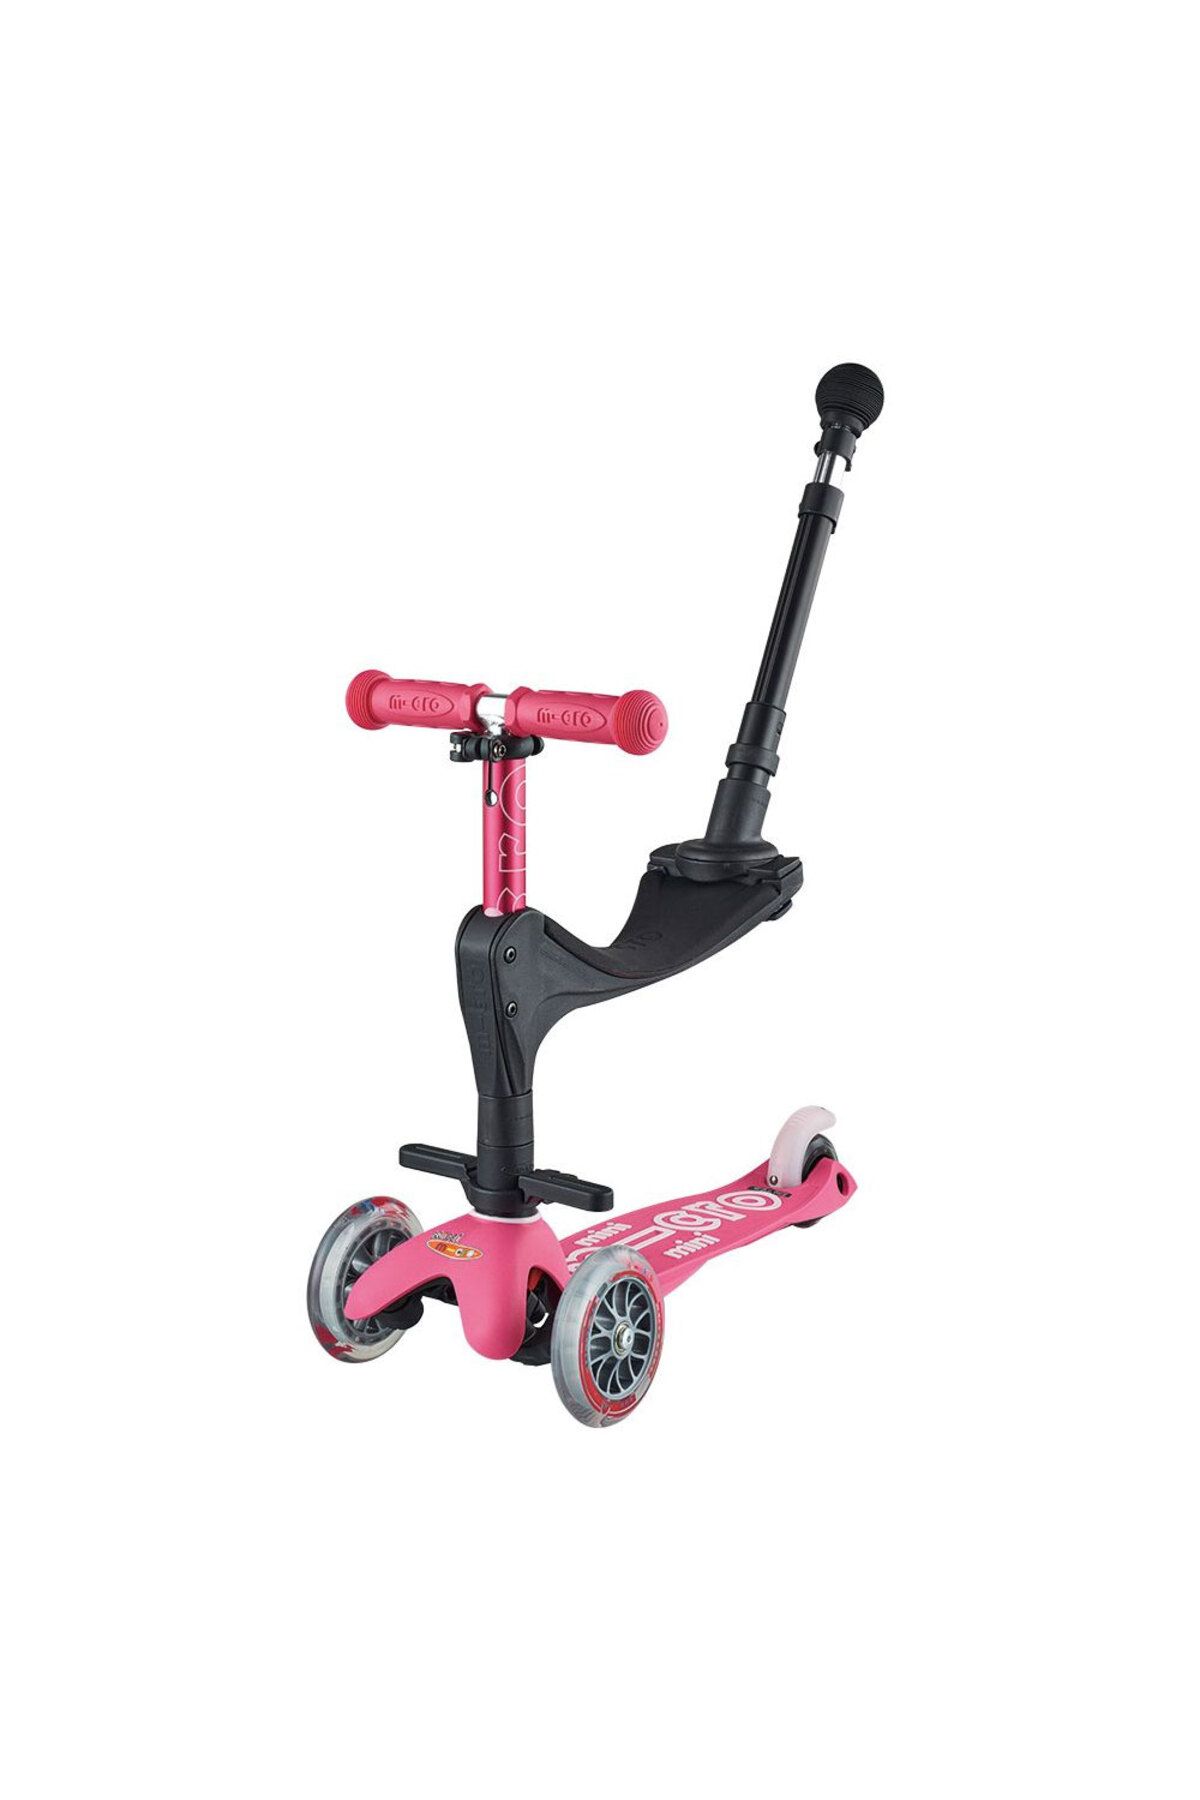 Micro Mini Micro Scooter 3in1 Deluxe Plus Pink MMD079